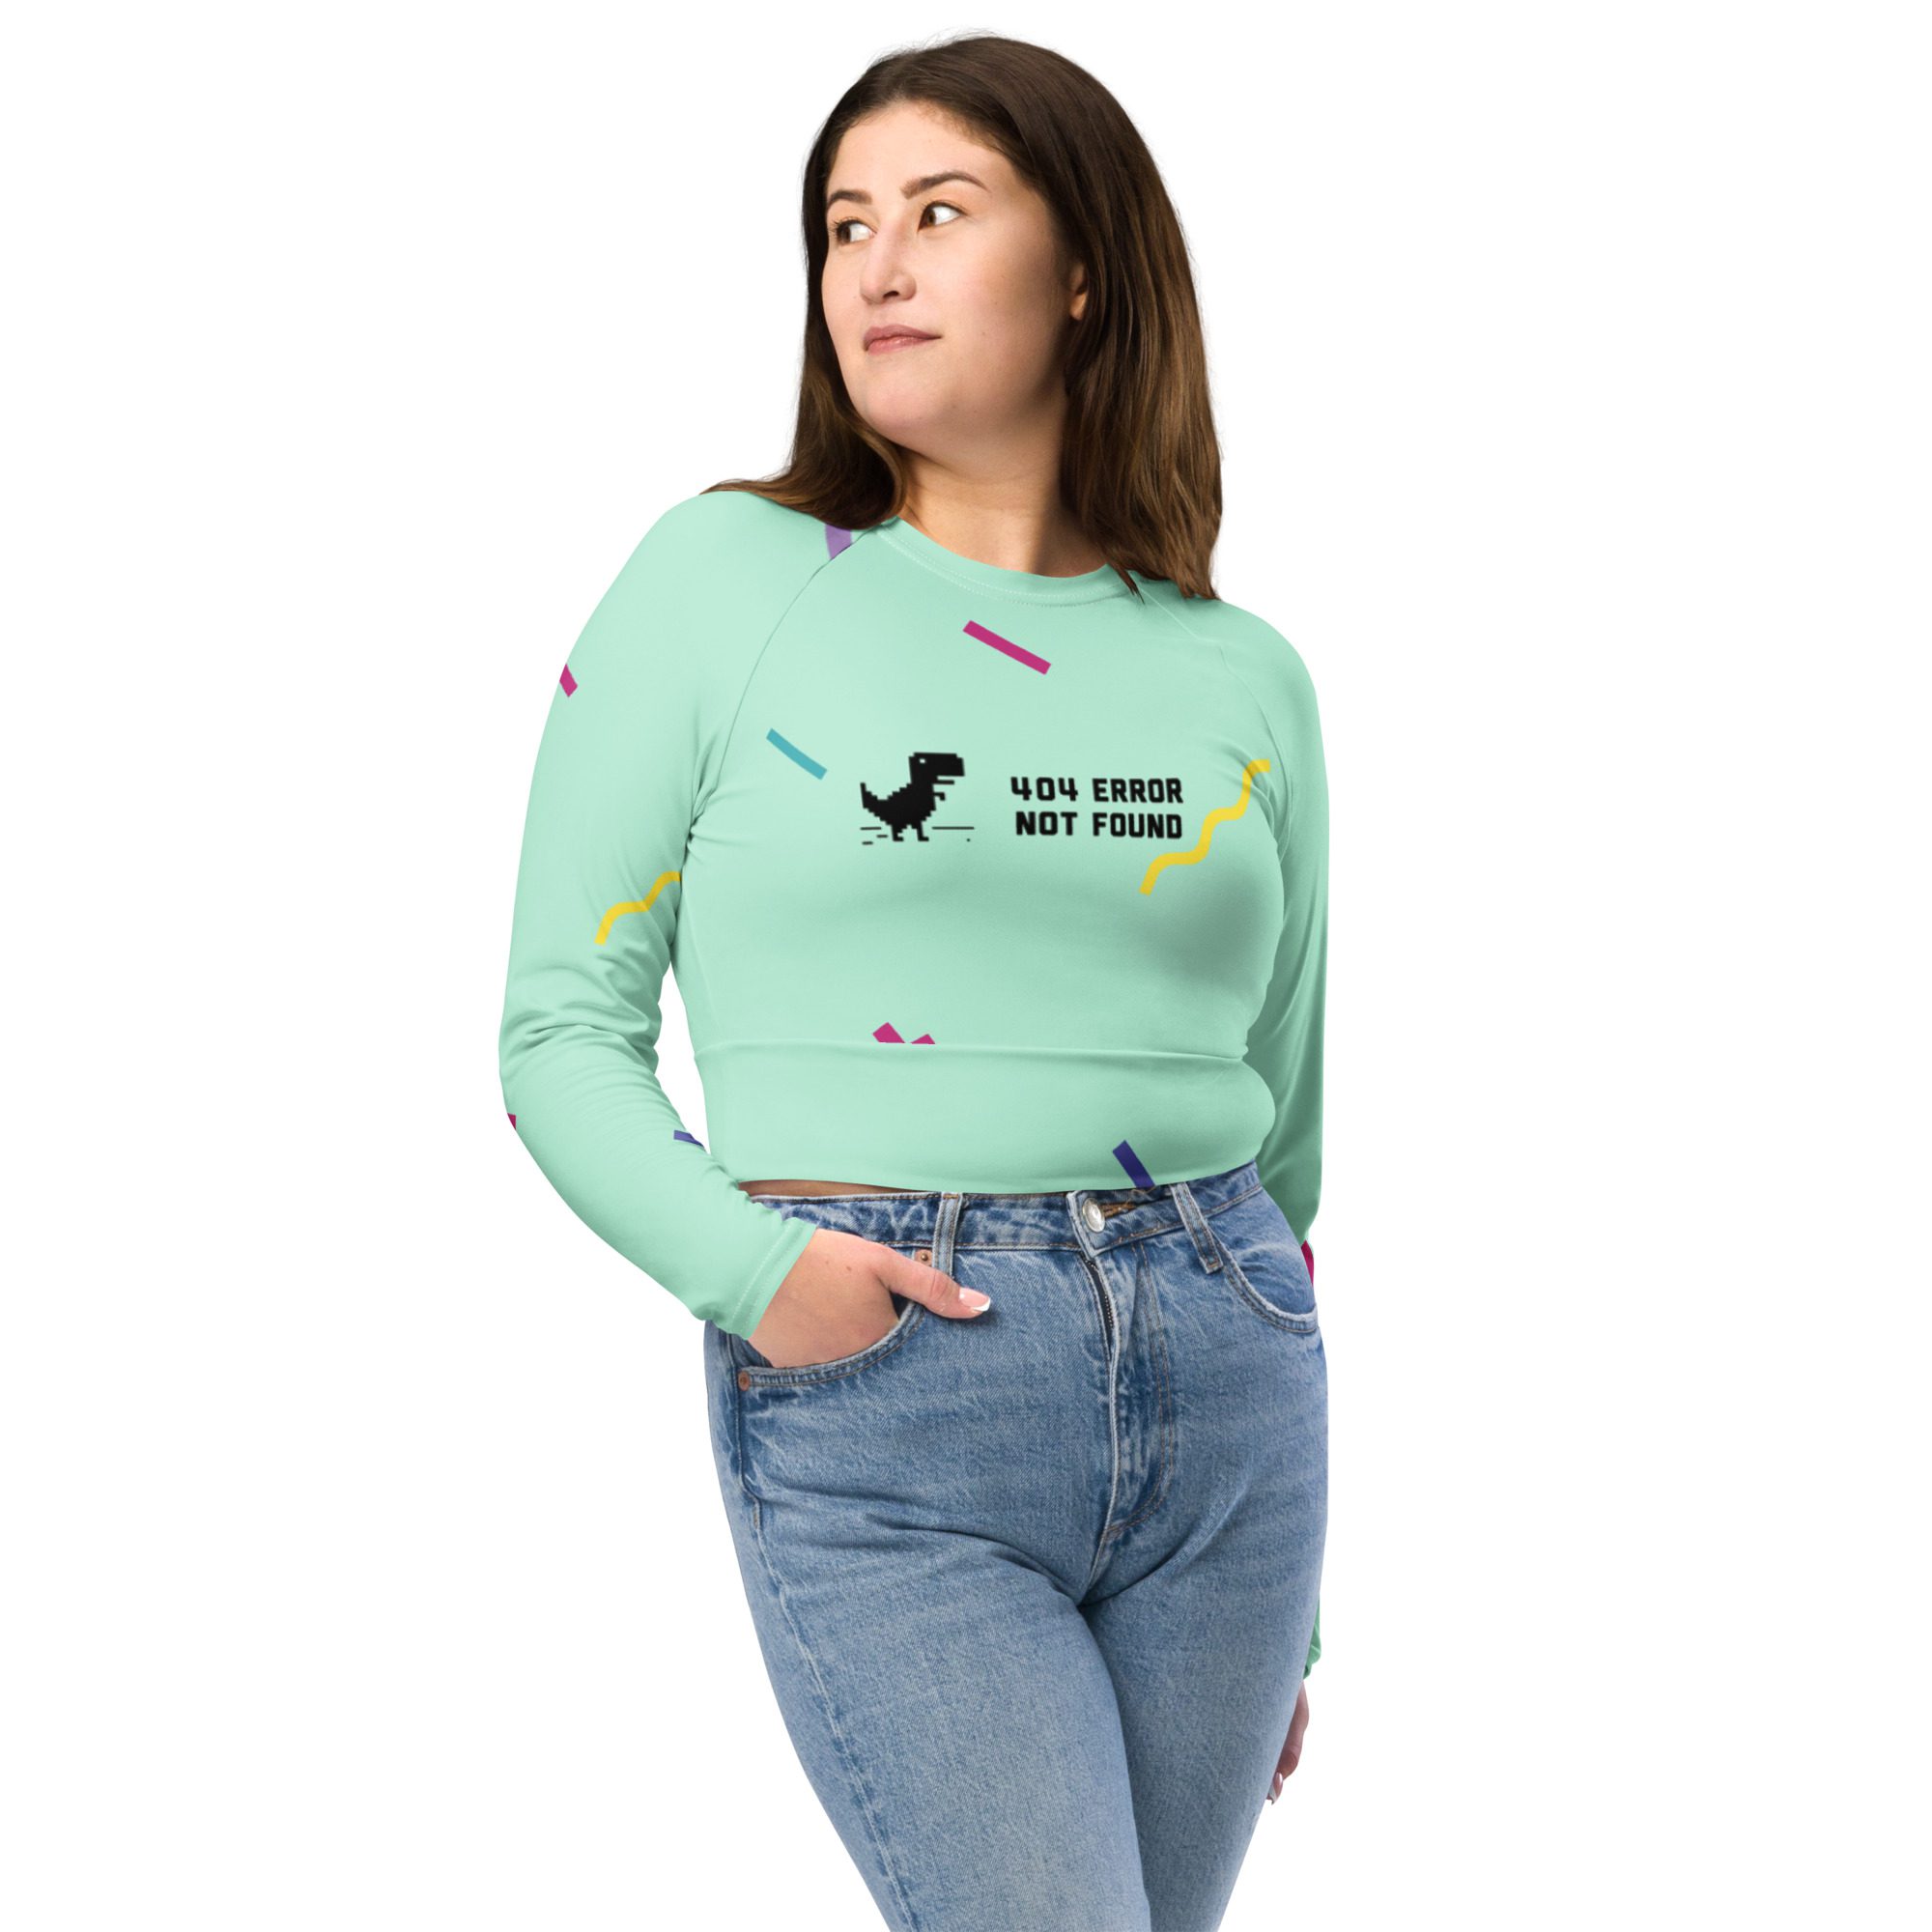 404 Error Not Found Recycled Long-sleeve Crop Top